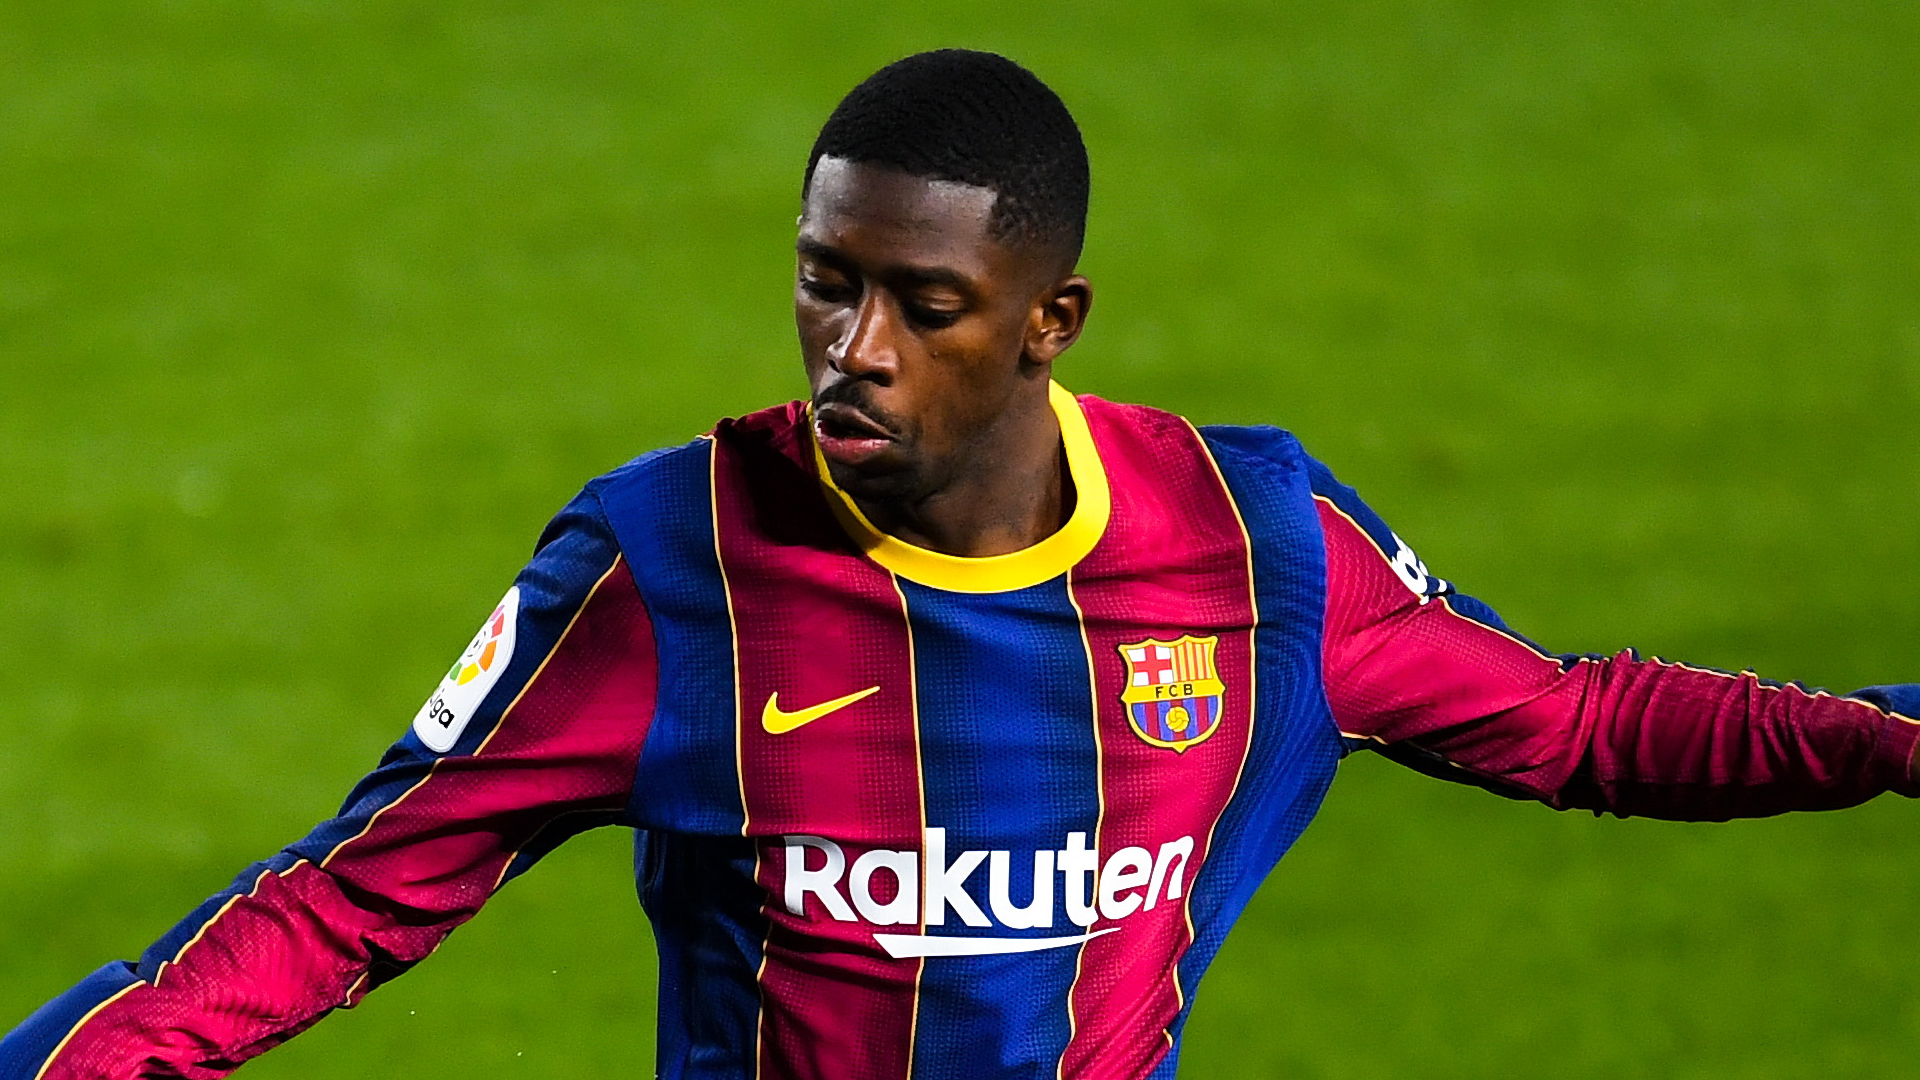 Dembele looks for Newcastle transfer as Barcelona contract talks stall